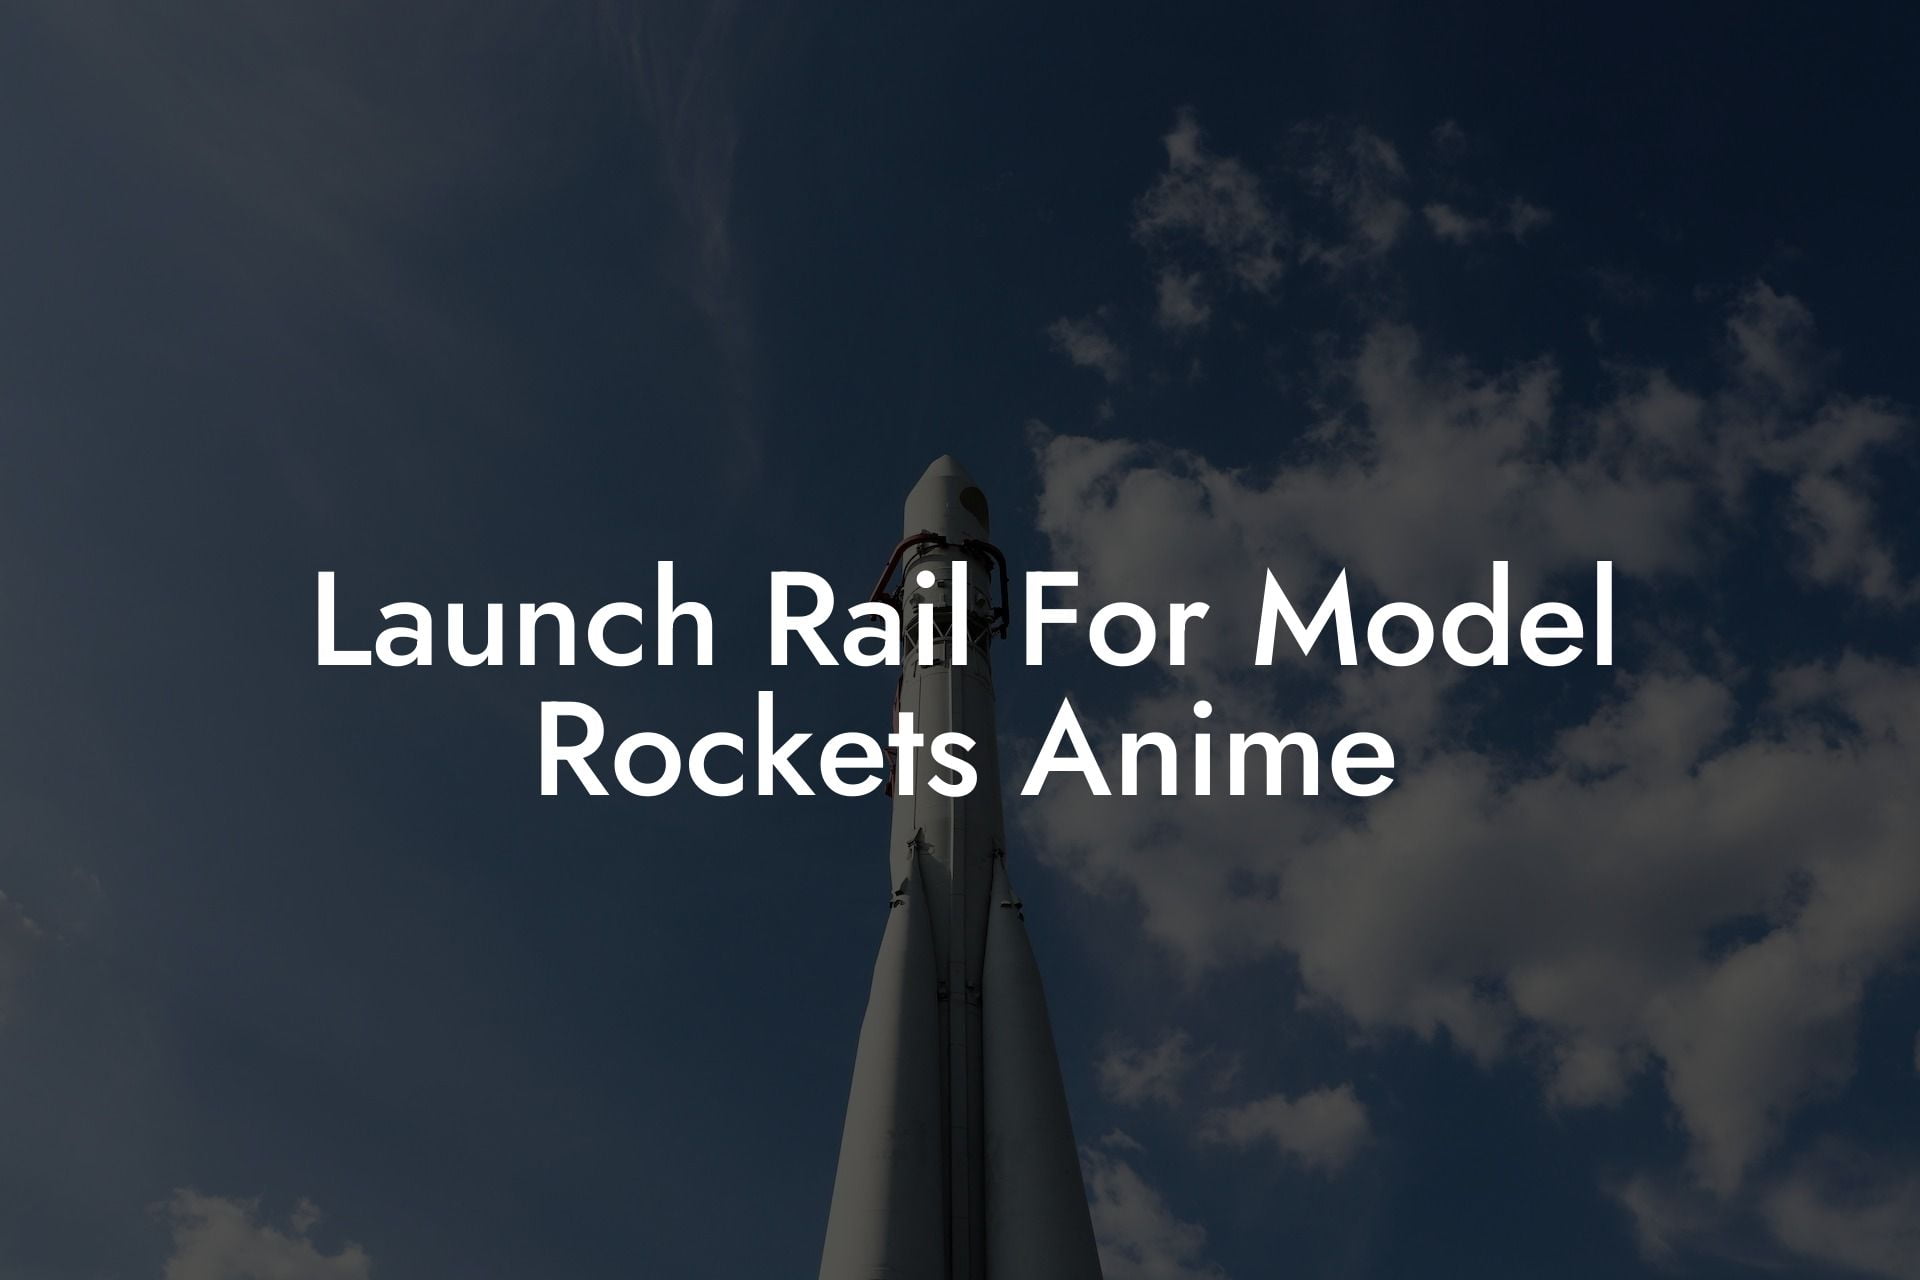 Launch Rail For Model Rockets Anime